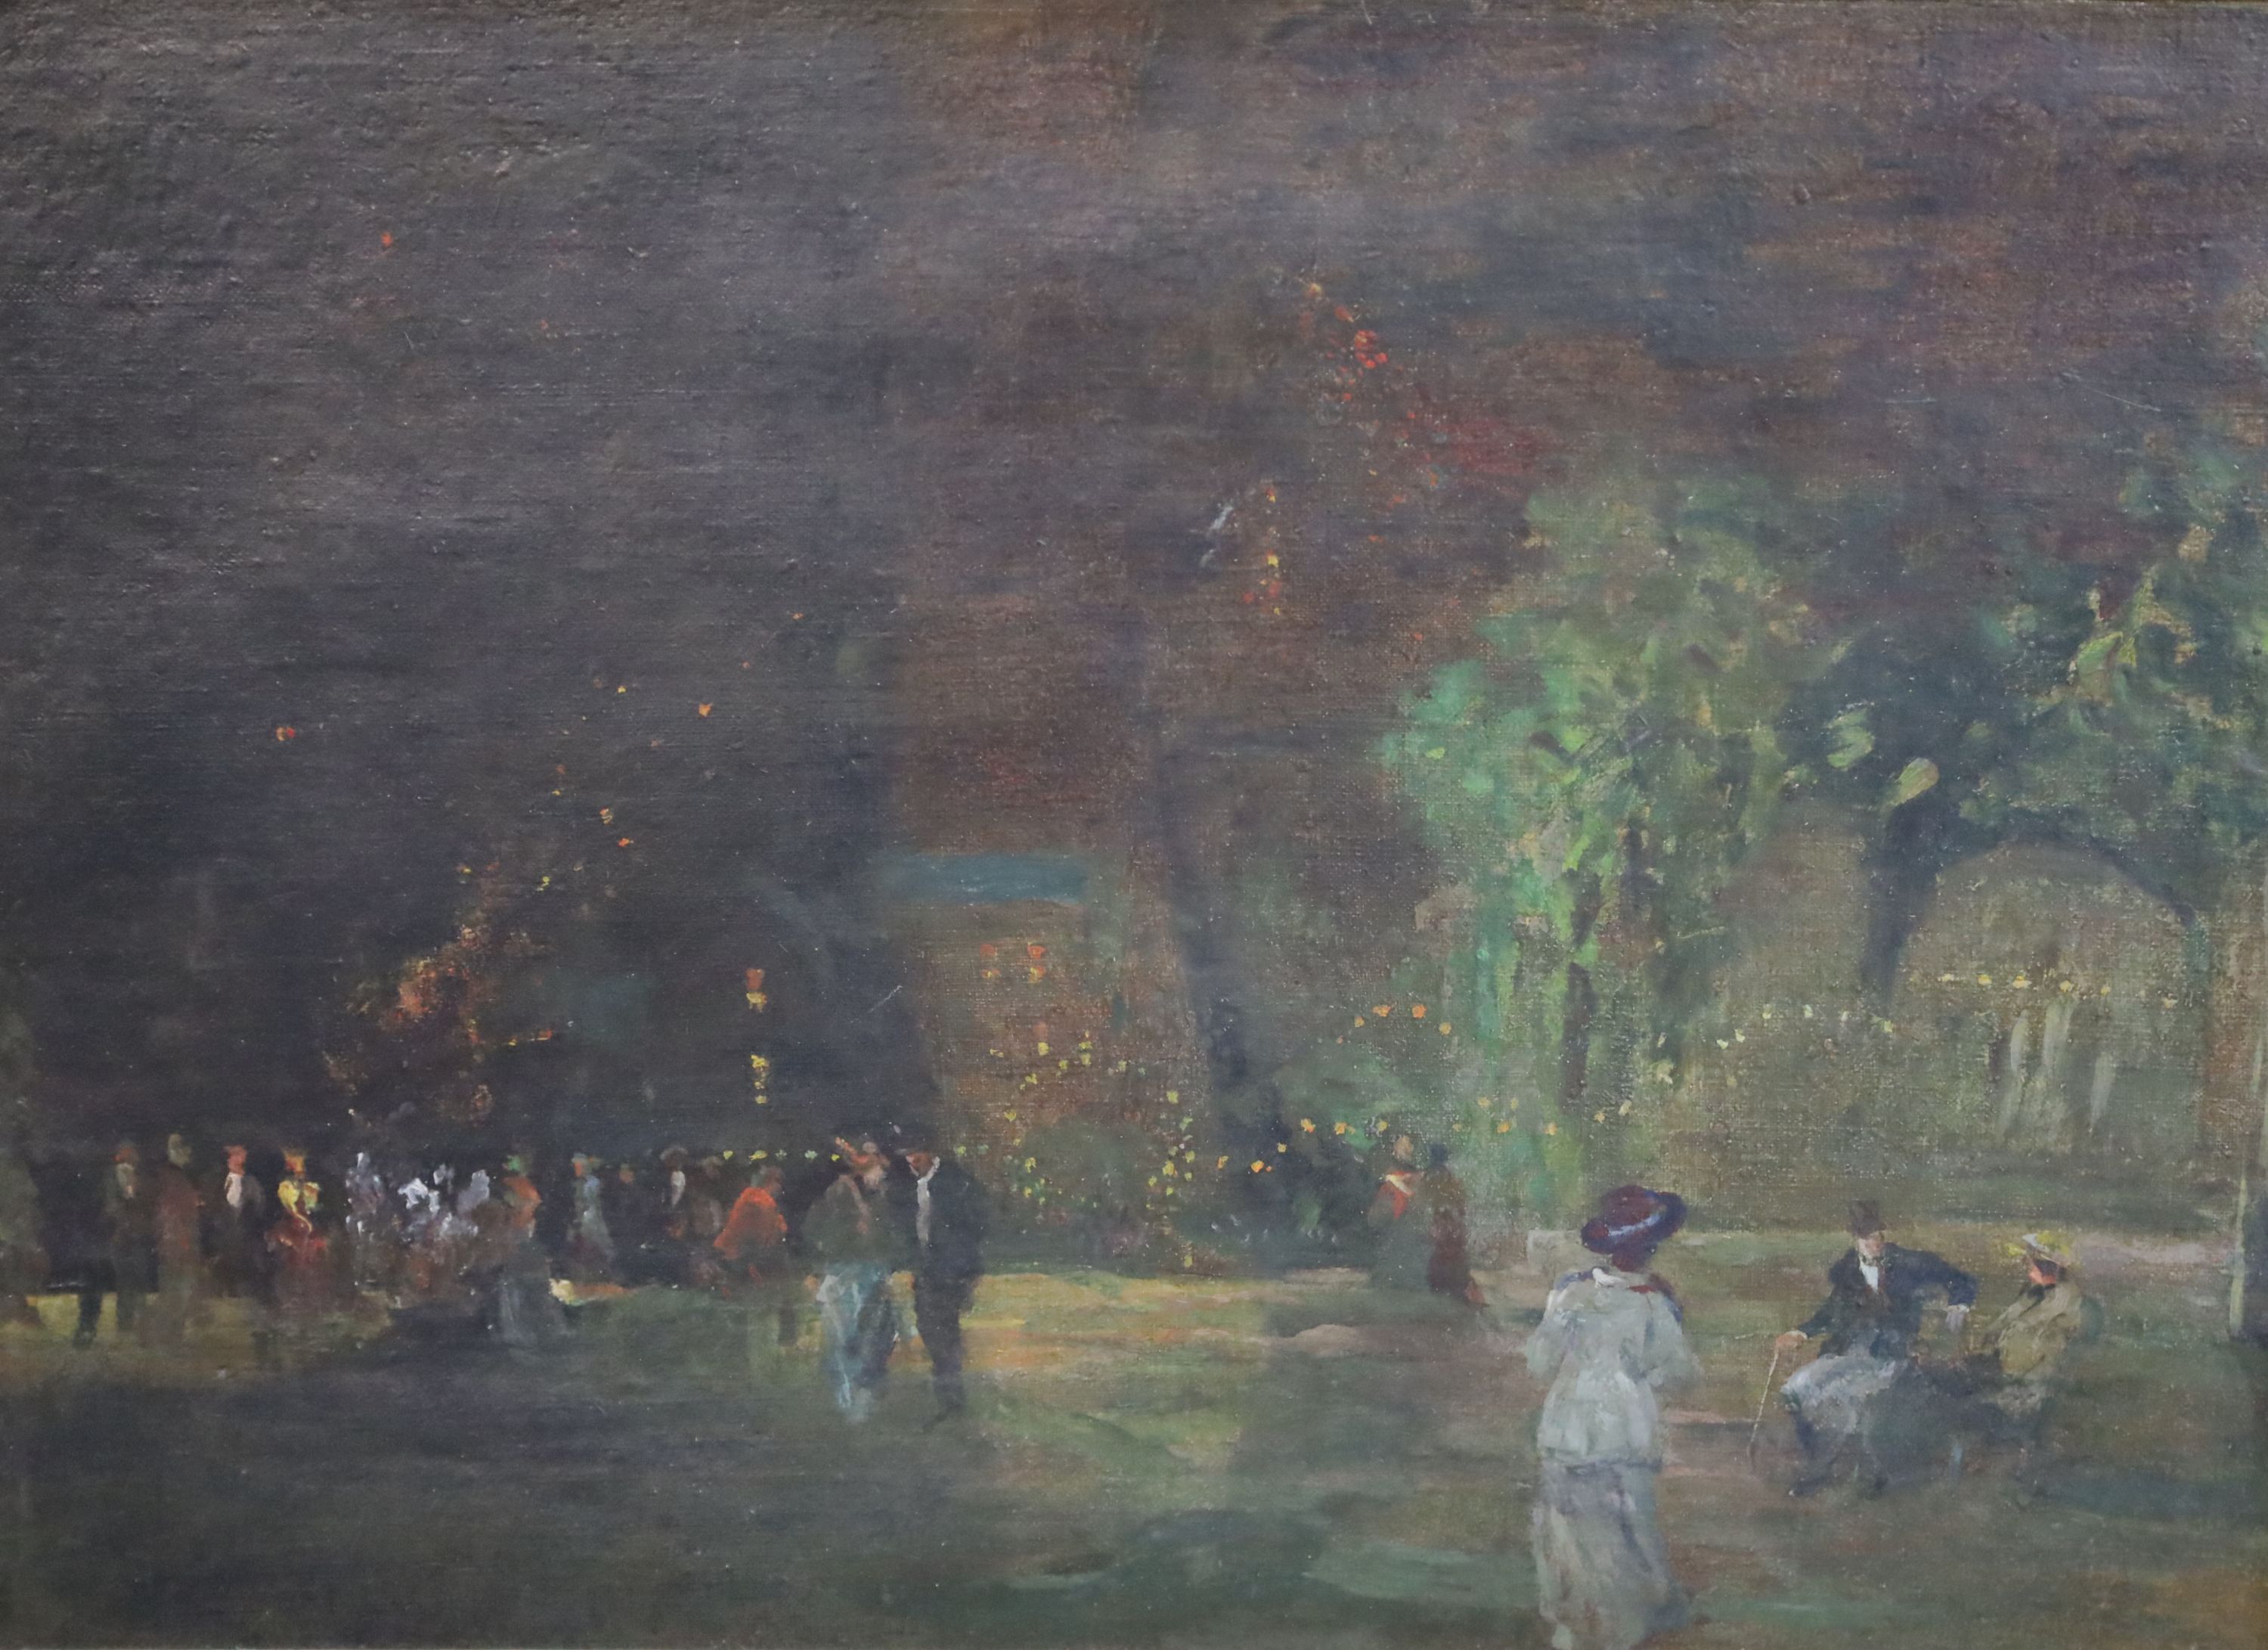 Walter Greaves (1846-1930), 'Nocturne', Cremorne Gardens, oil on canvas, 44 x 59.75cm